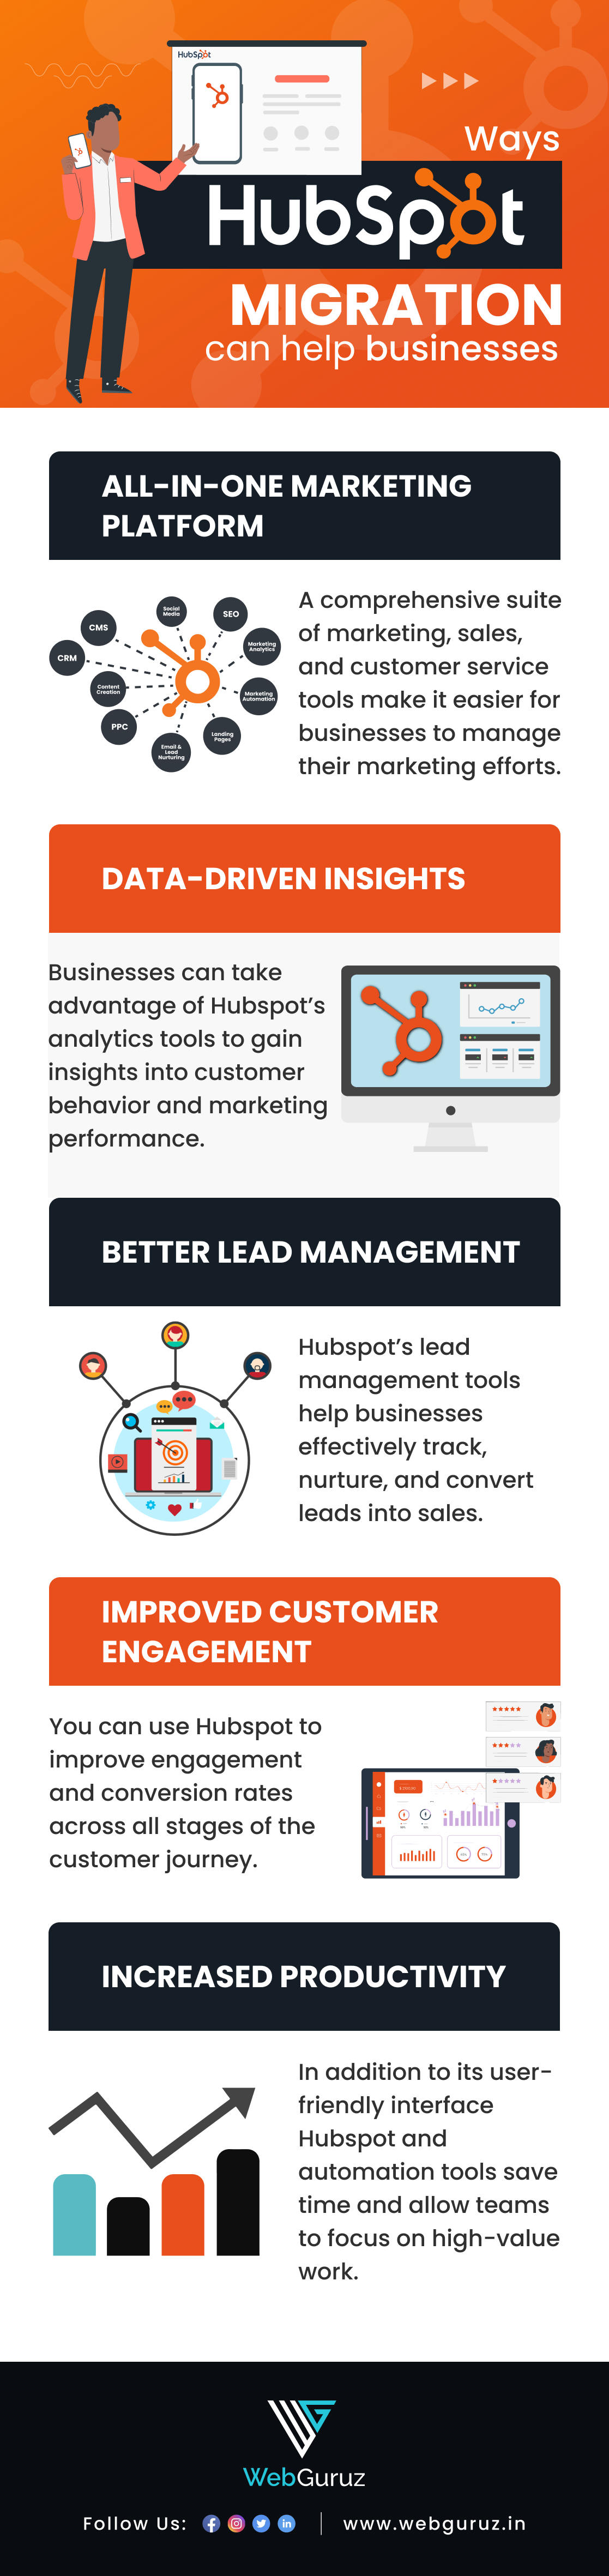 Top reasons why you should migrate to HubSpot right away!